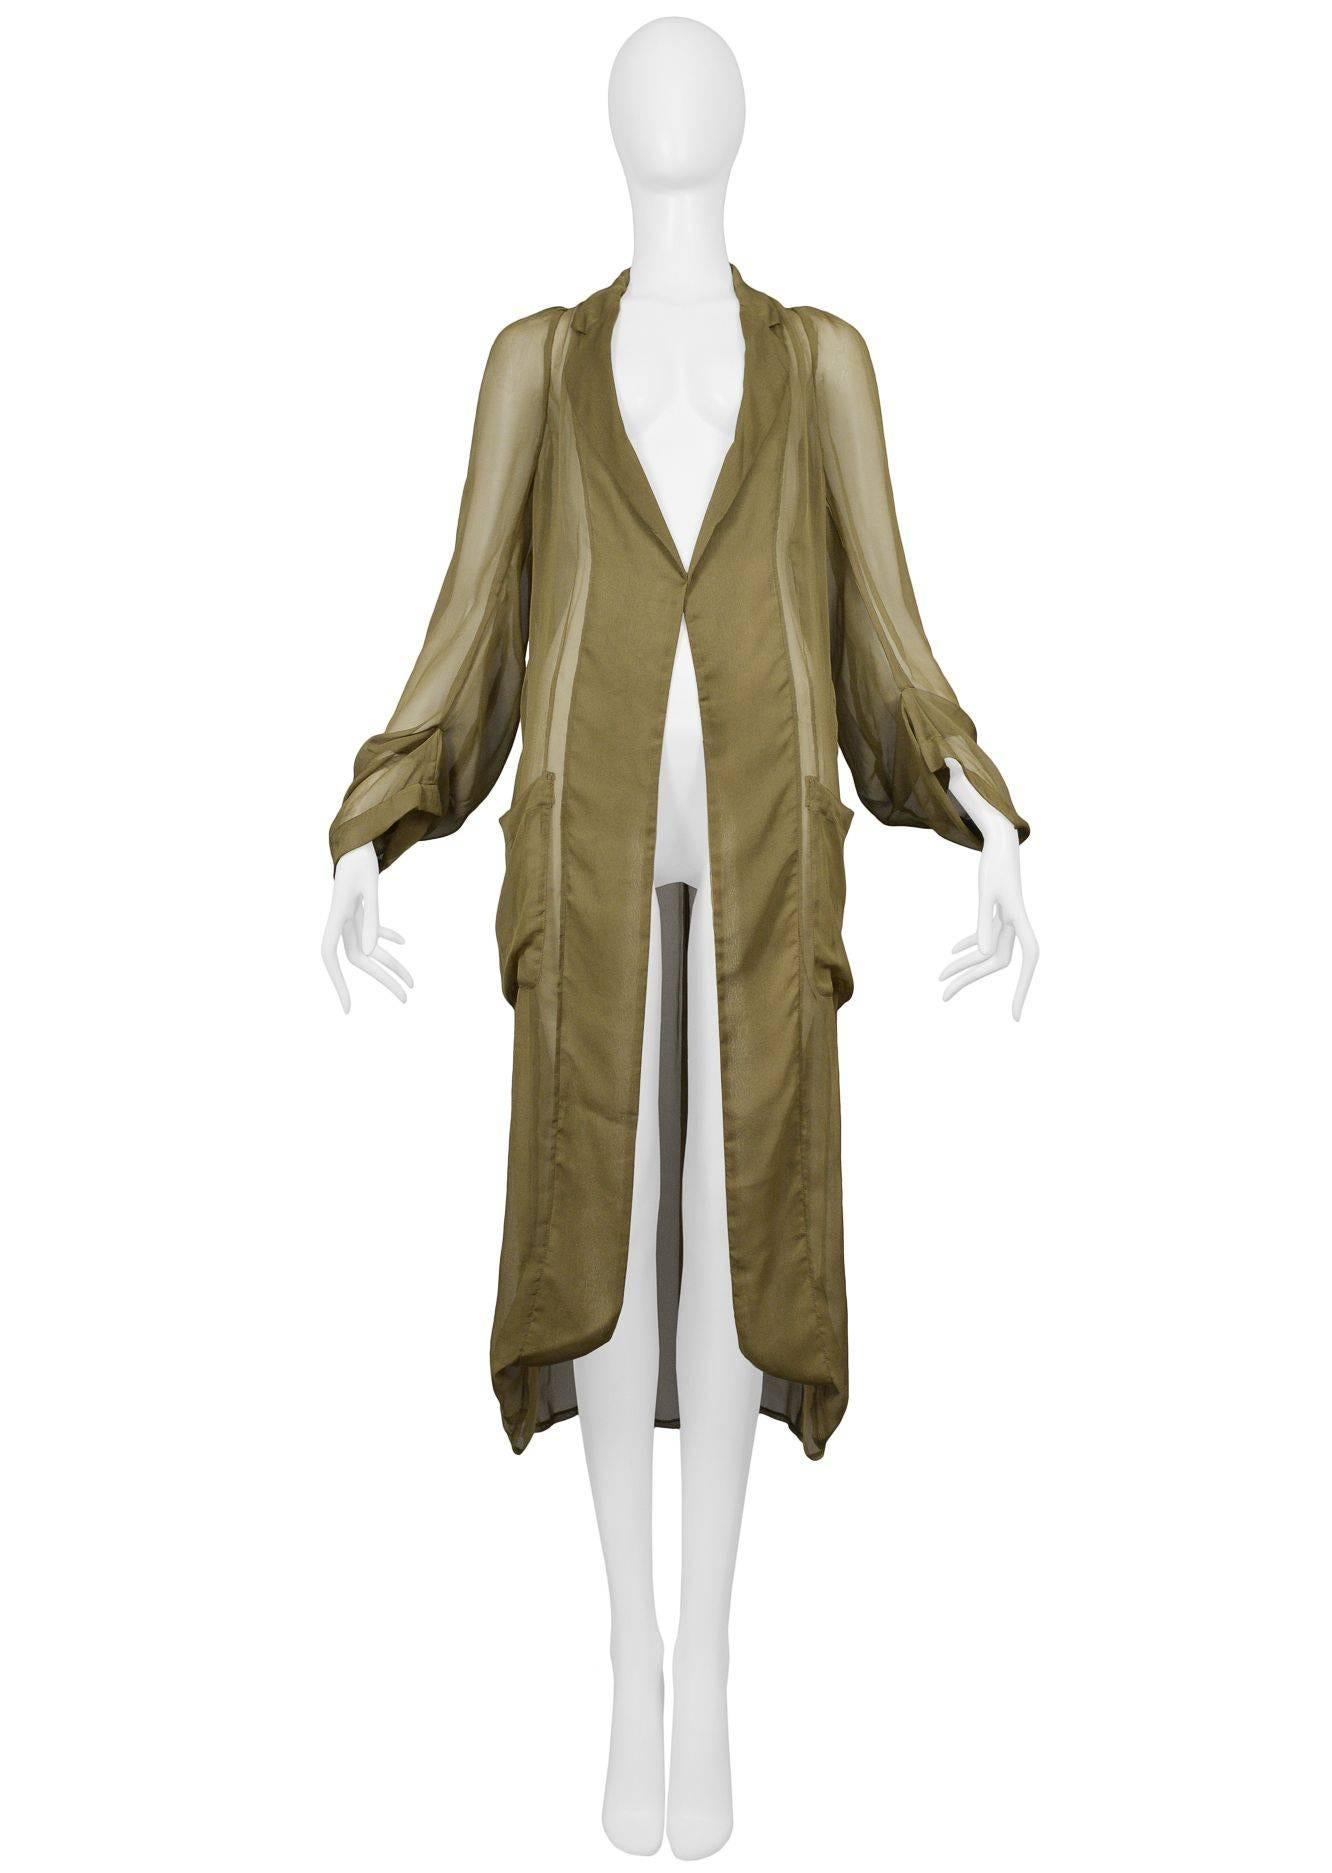 Vintage Comme des Garcons olive green sheer duster coat with long sleeves.